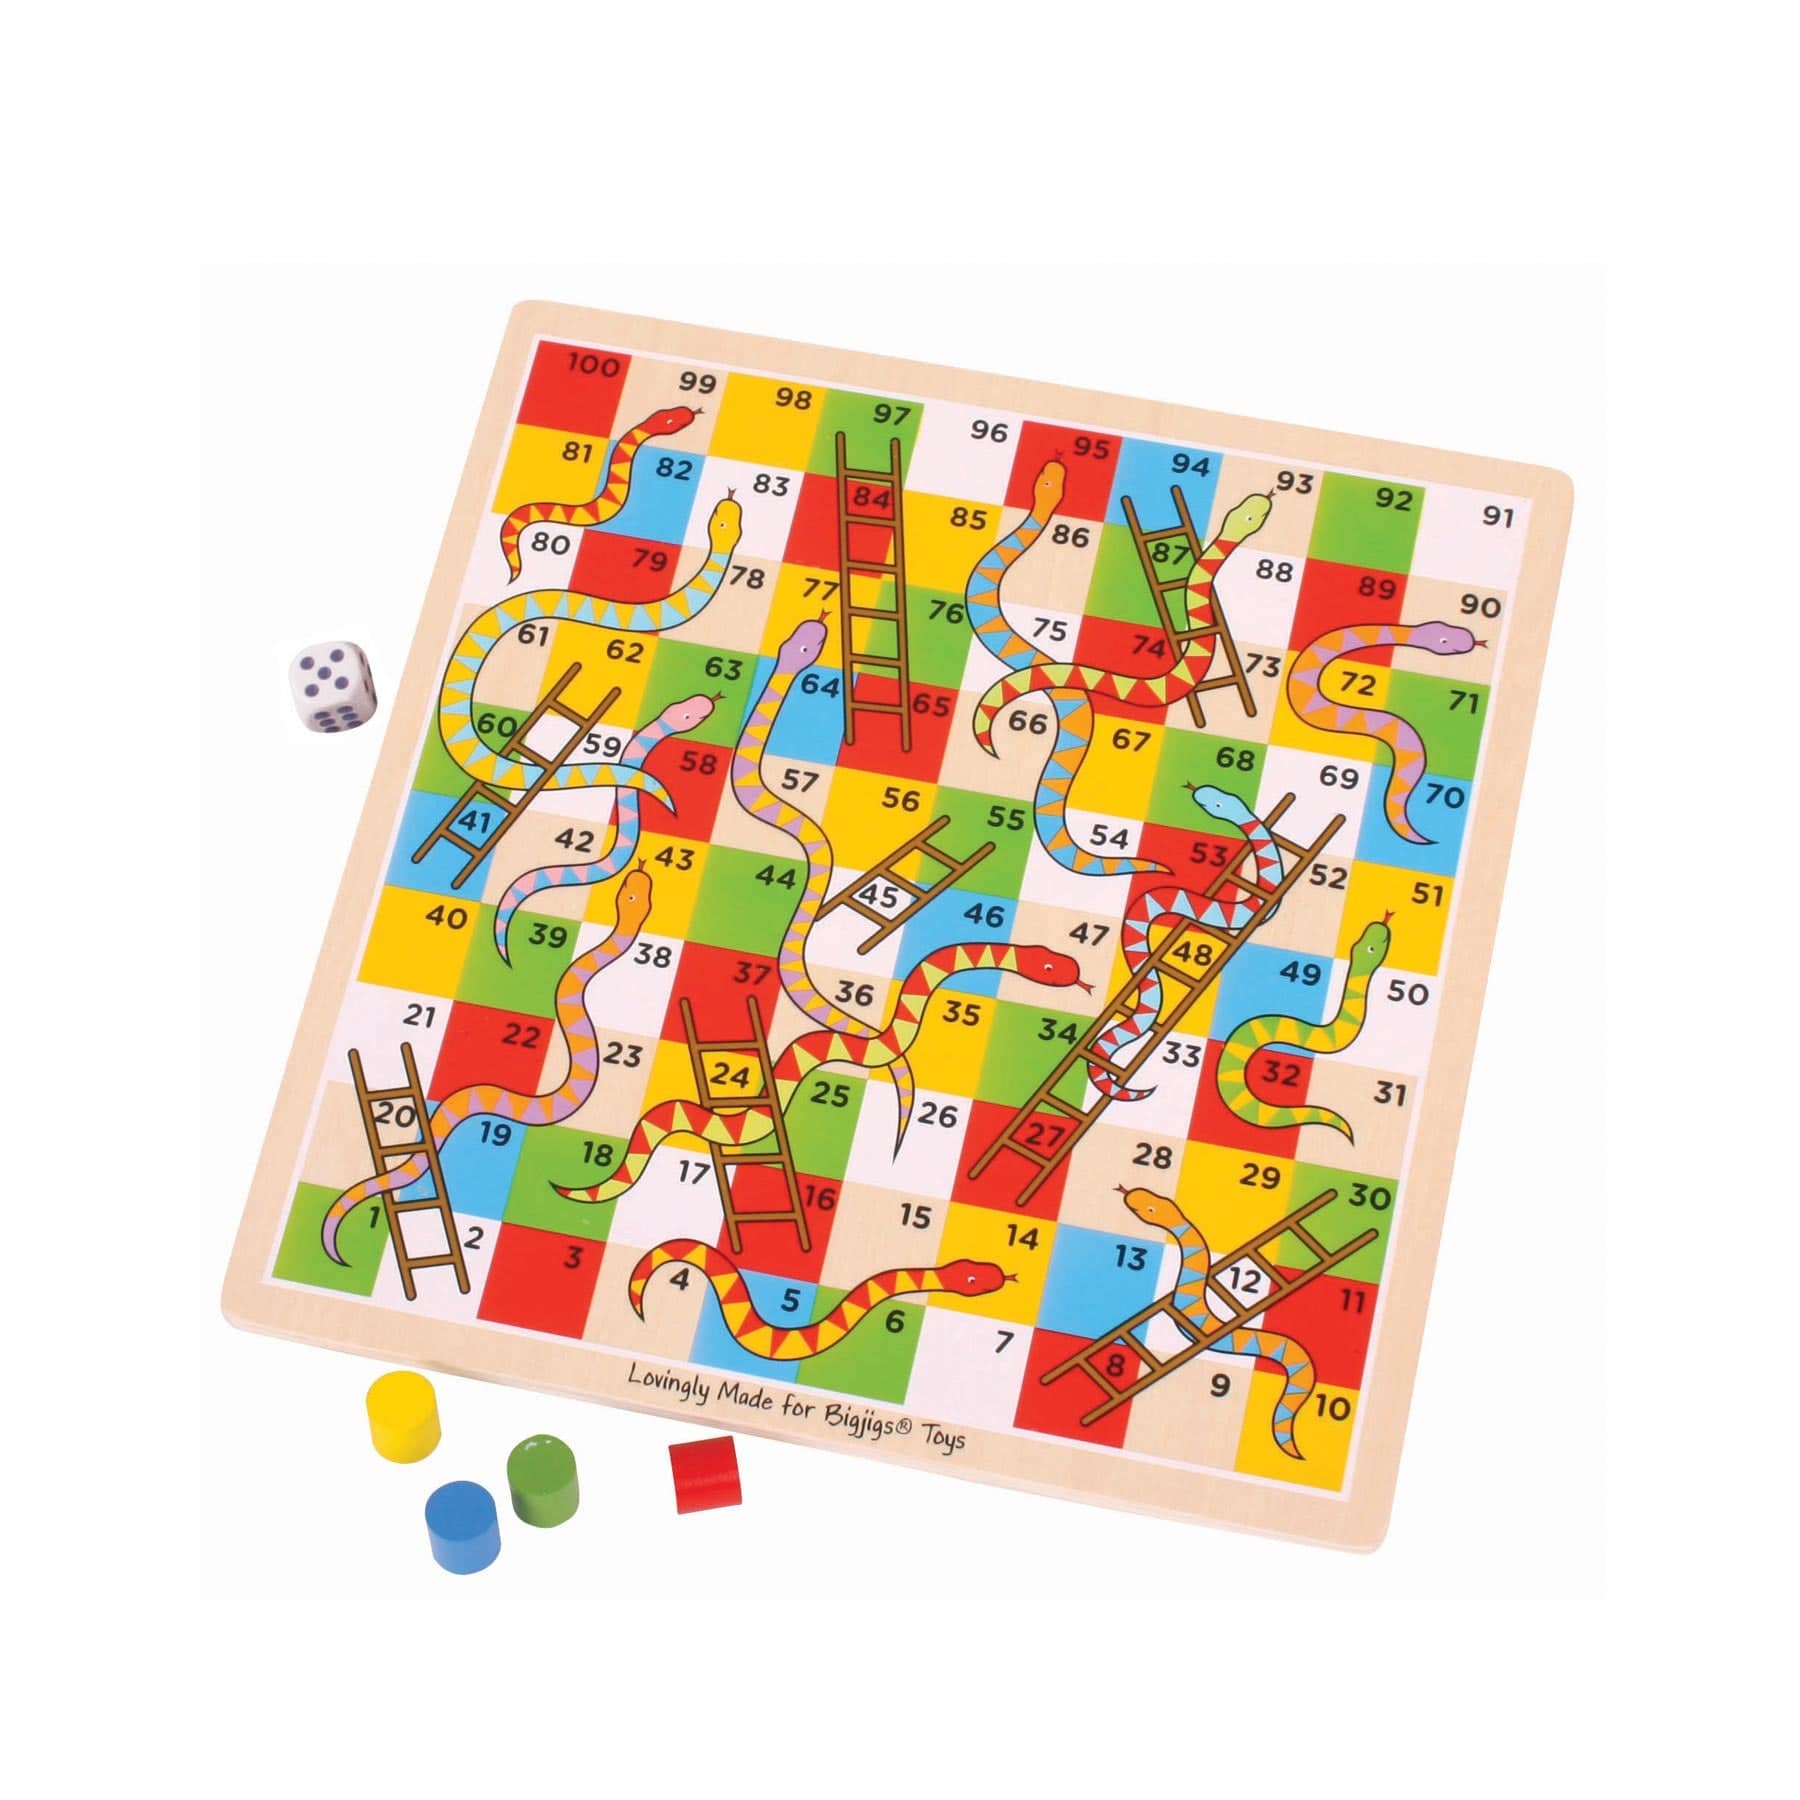 Traditional snakes & ladders